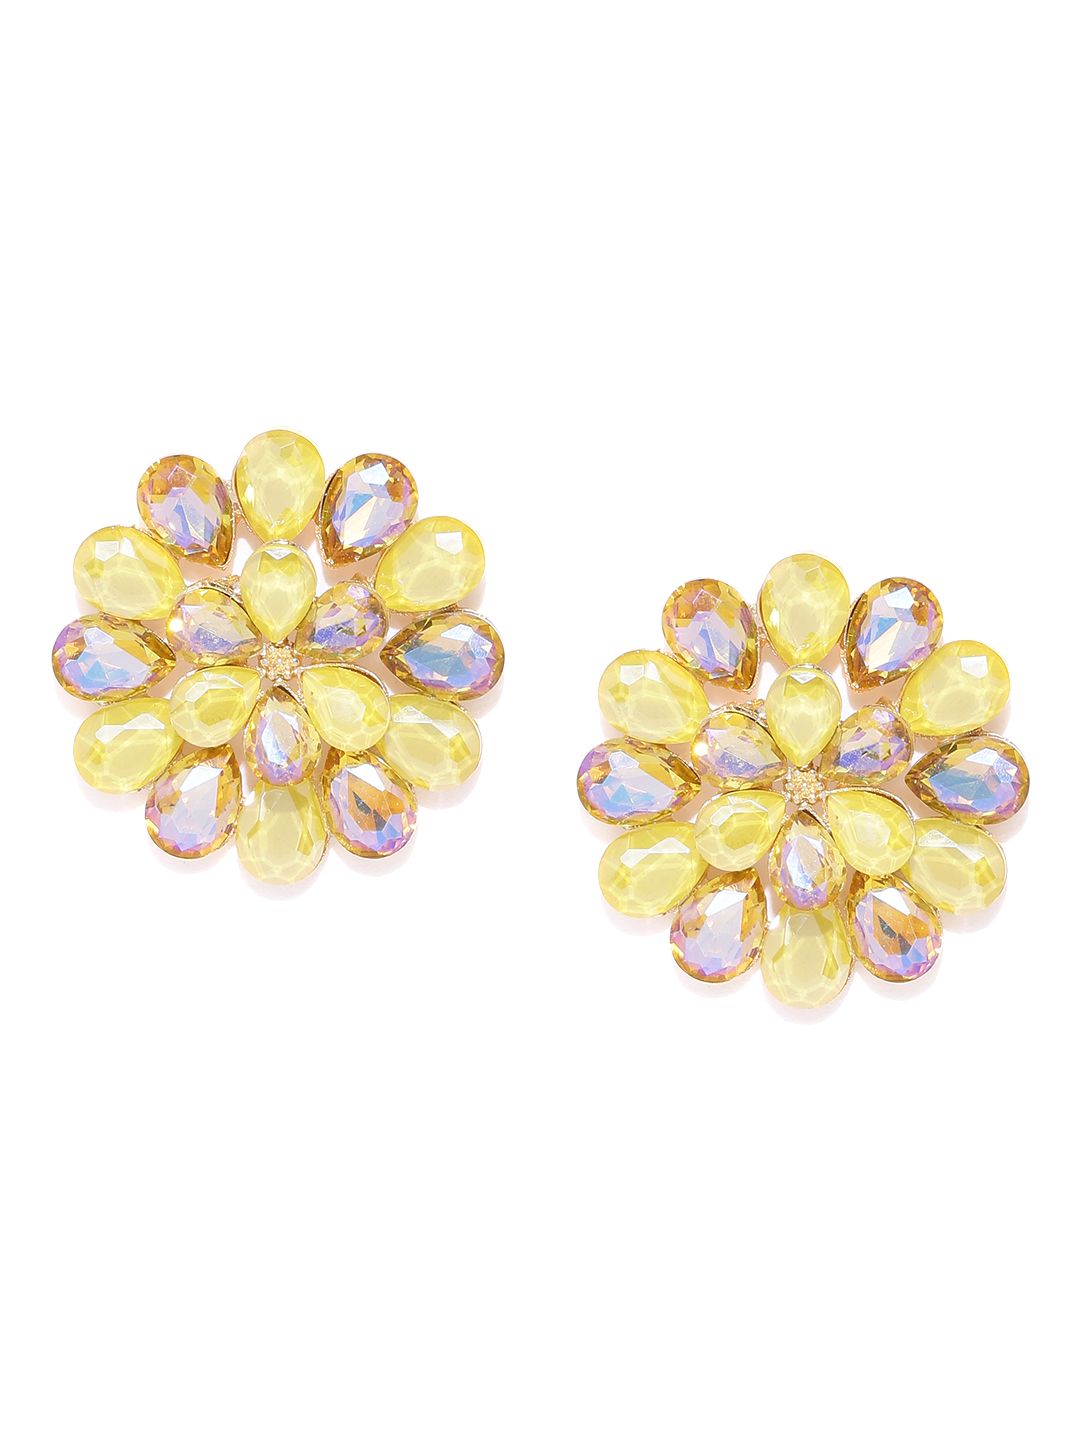 YouBella Yellow & Gold-Toned Stone-Studded Floral Drop Earrings Price in India